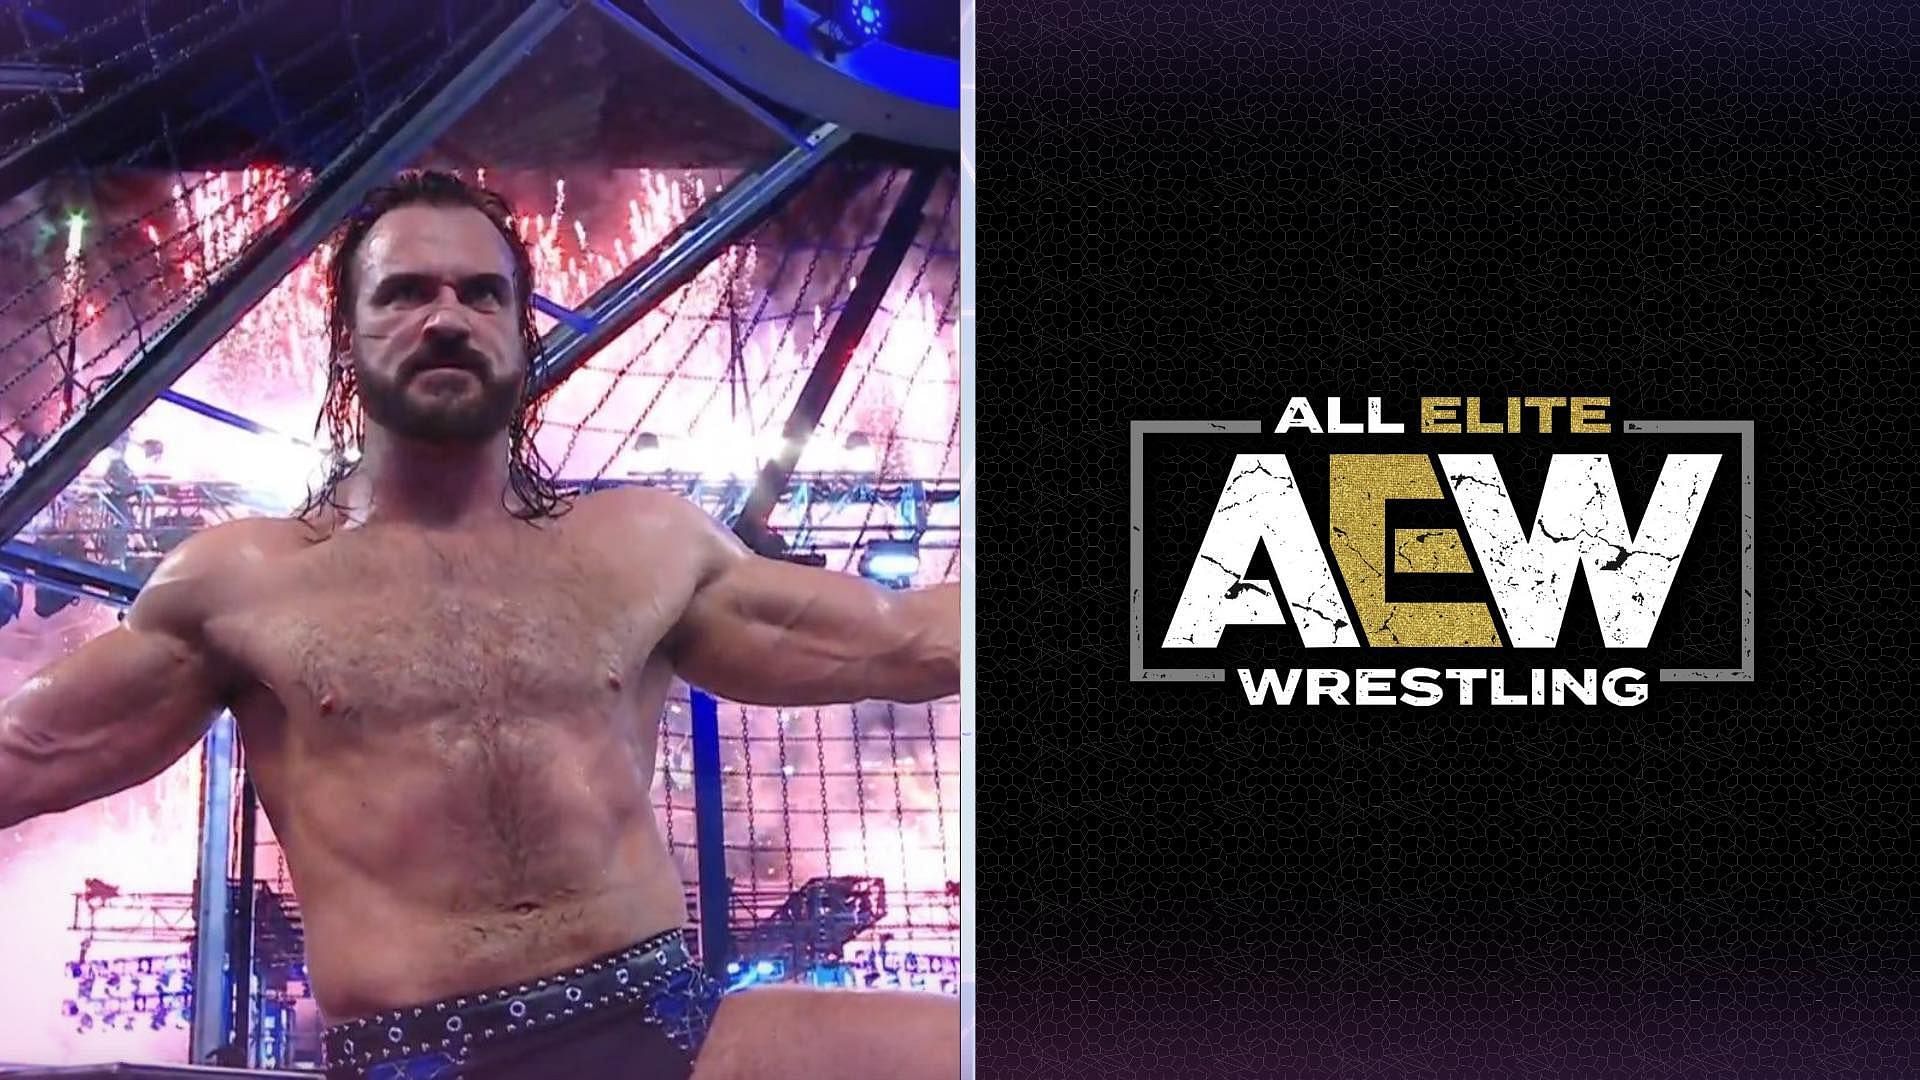 Drew McIntyre won the Elimination Chamber match last weekend [Photo courtesy of his Twitter account]